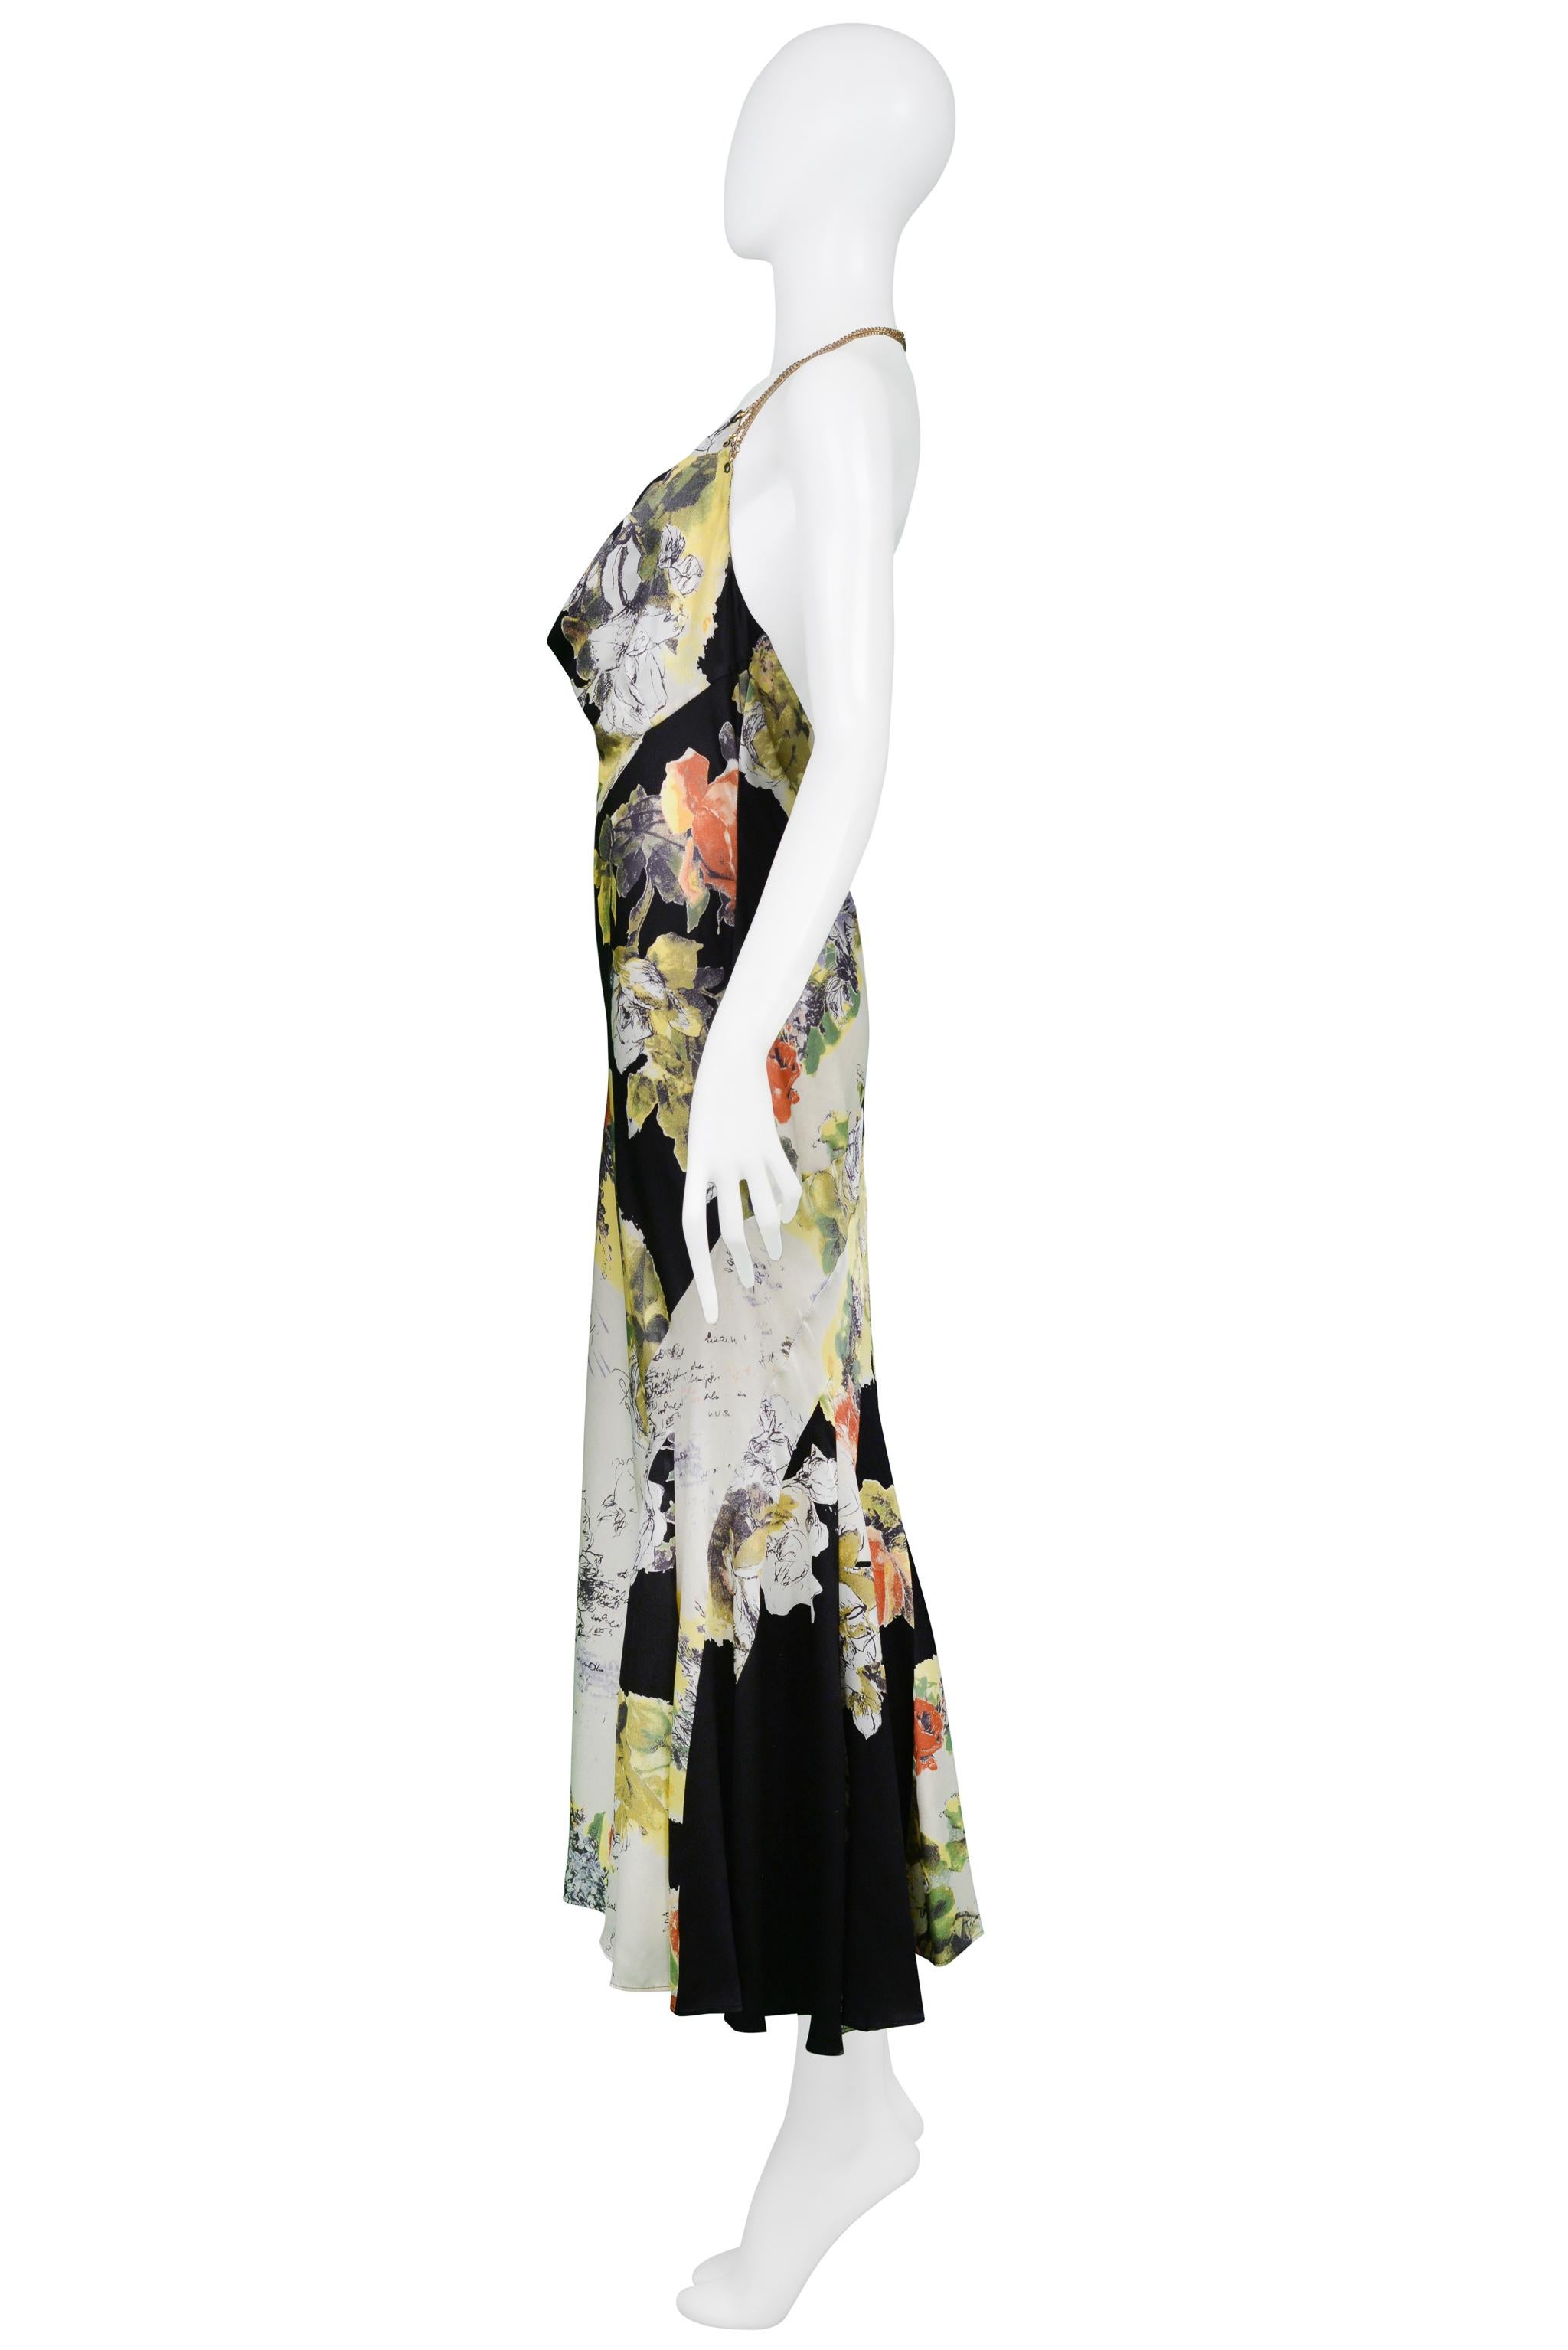 Roberto Cavalli Black & Yellow Floral Print Silk Slip Dress With Chain Halter In Excellent Condition For Sale In Los Angeles, CA